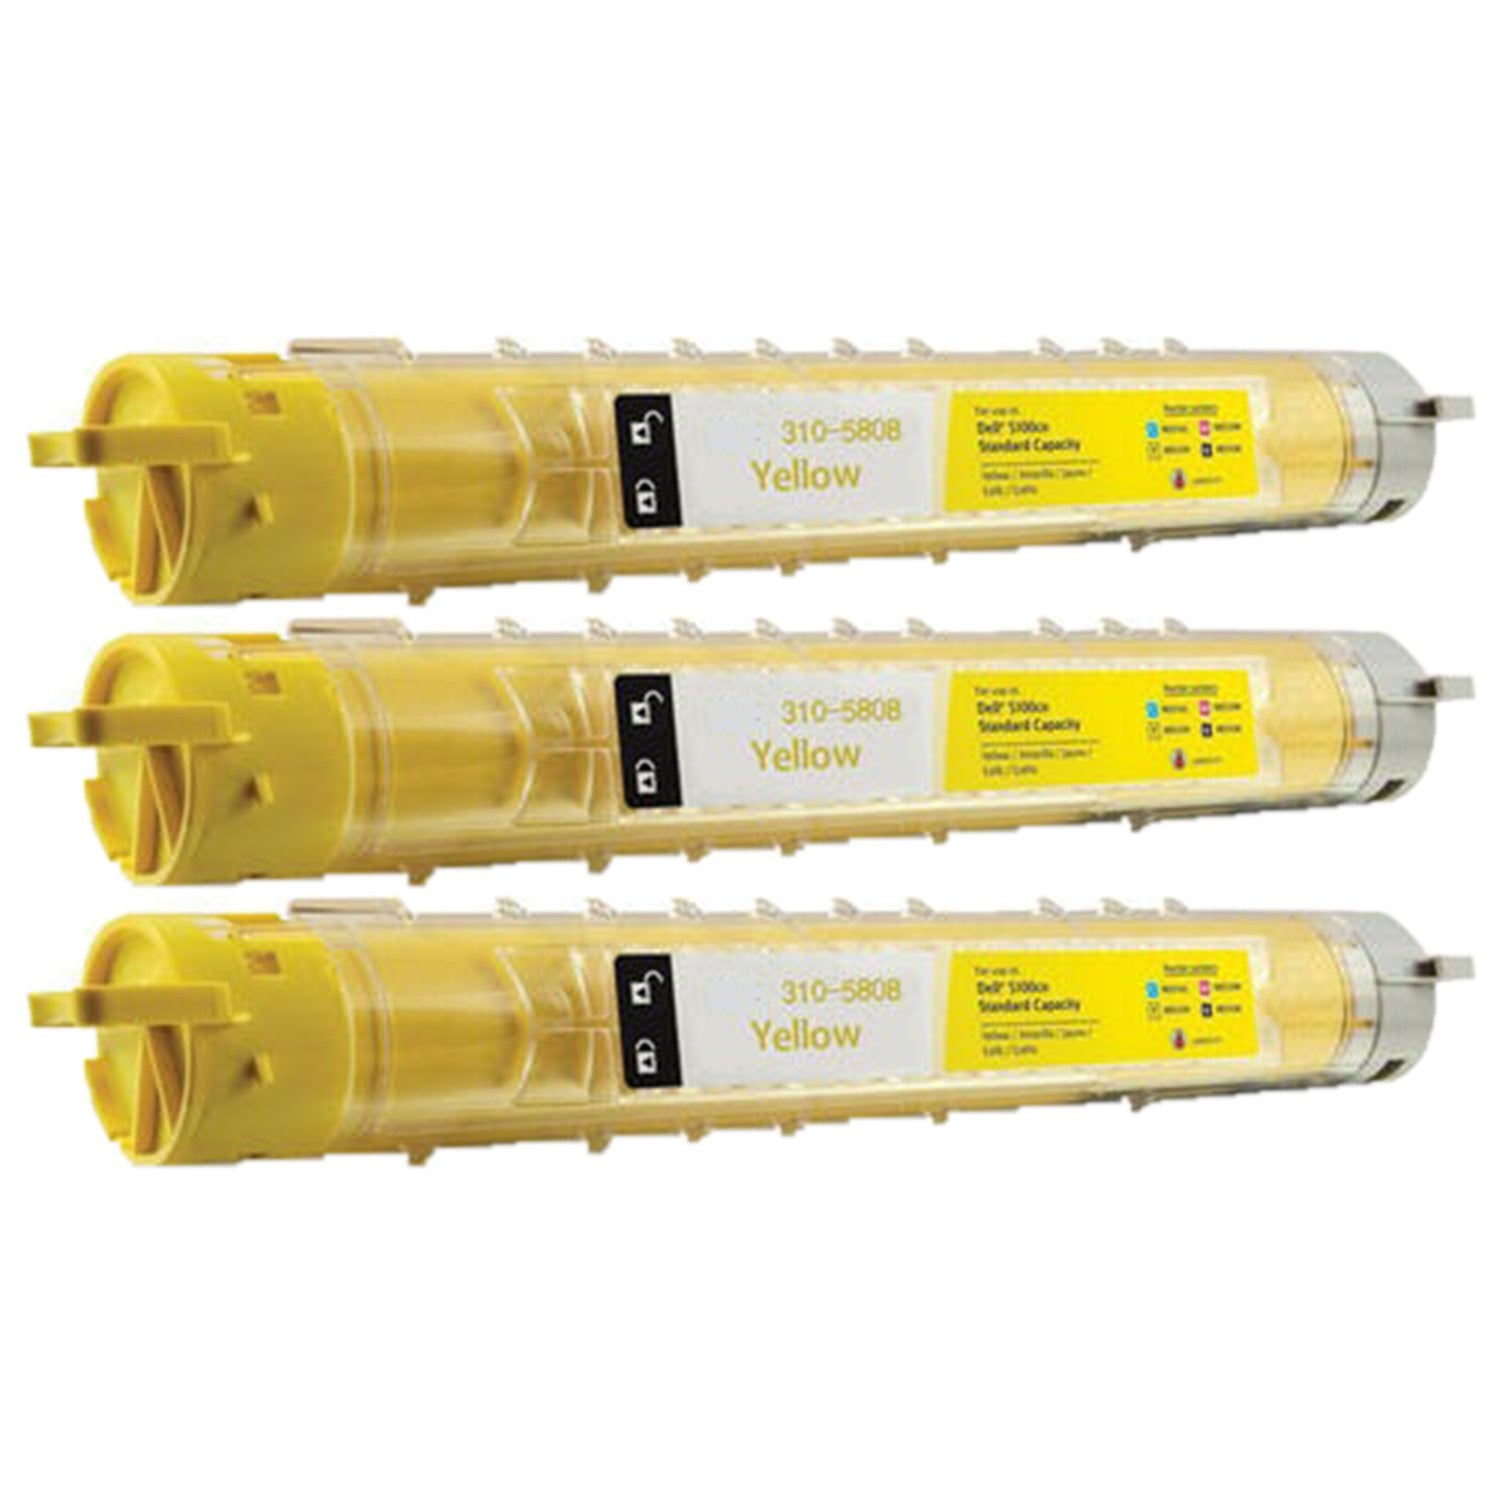 Absolute Toner Compatible DELL 310-5808 Yellow Toner Cartridge | Absolute Toner Dell Toner Cartridges